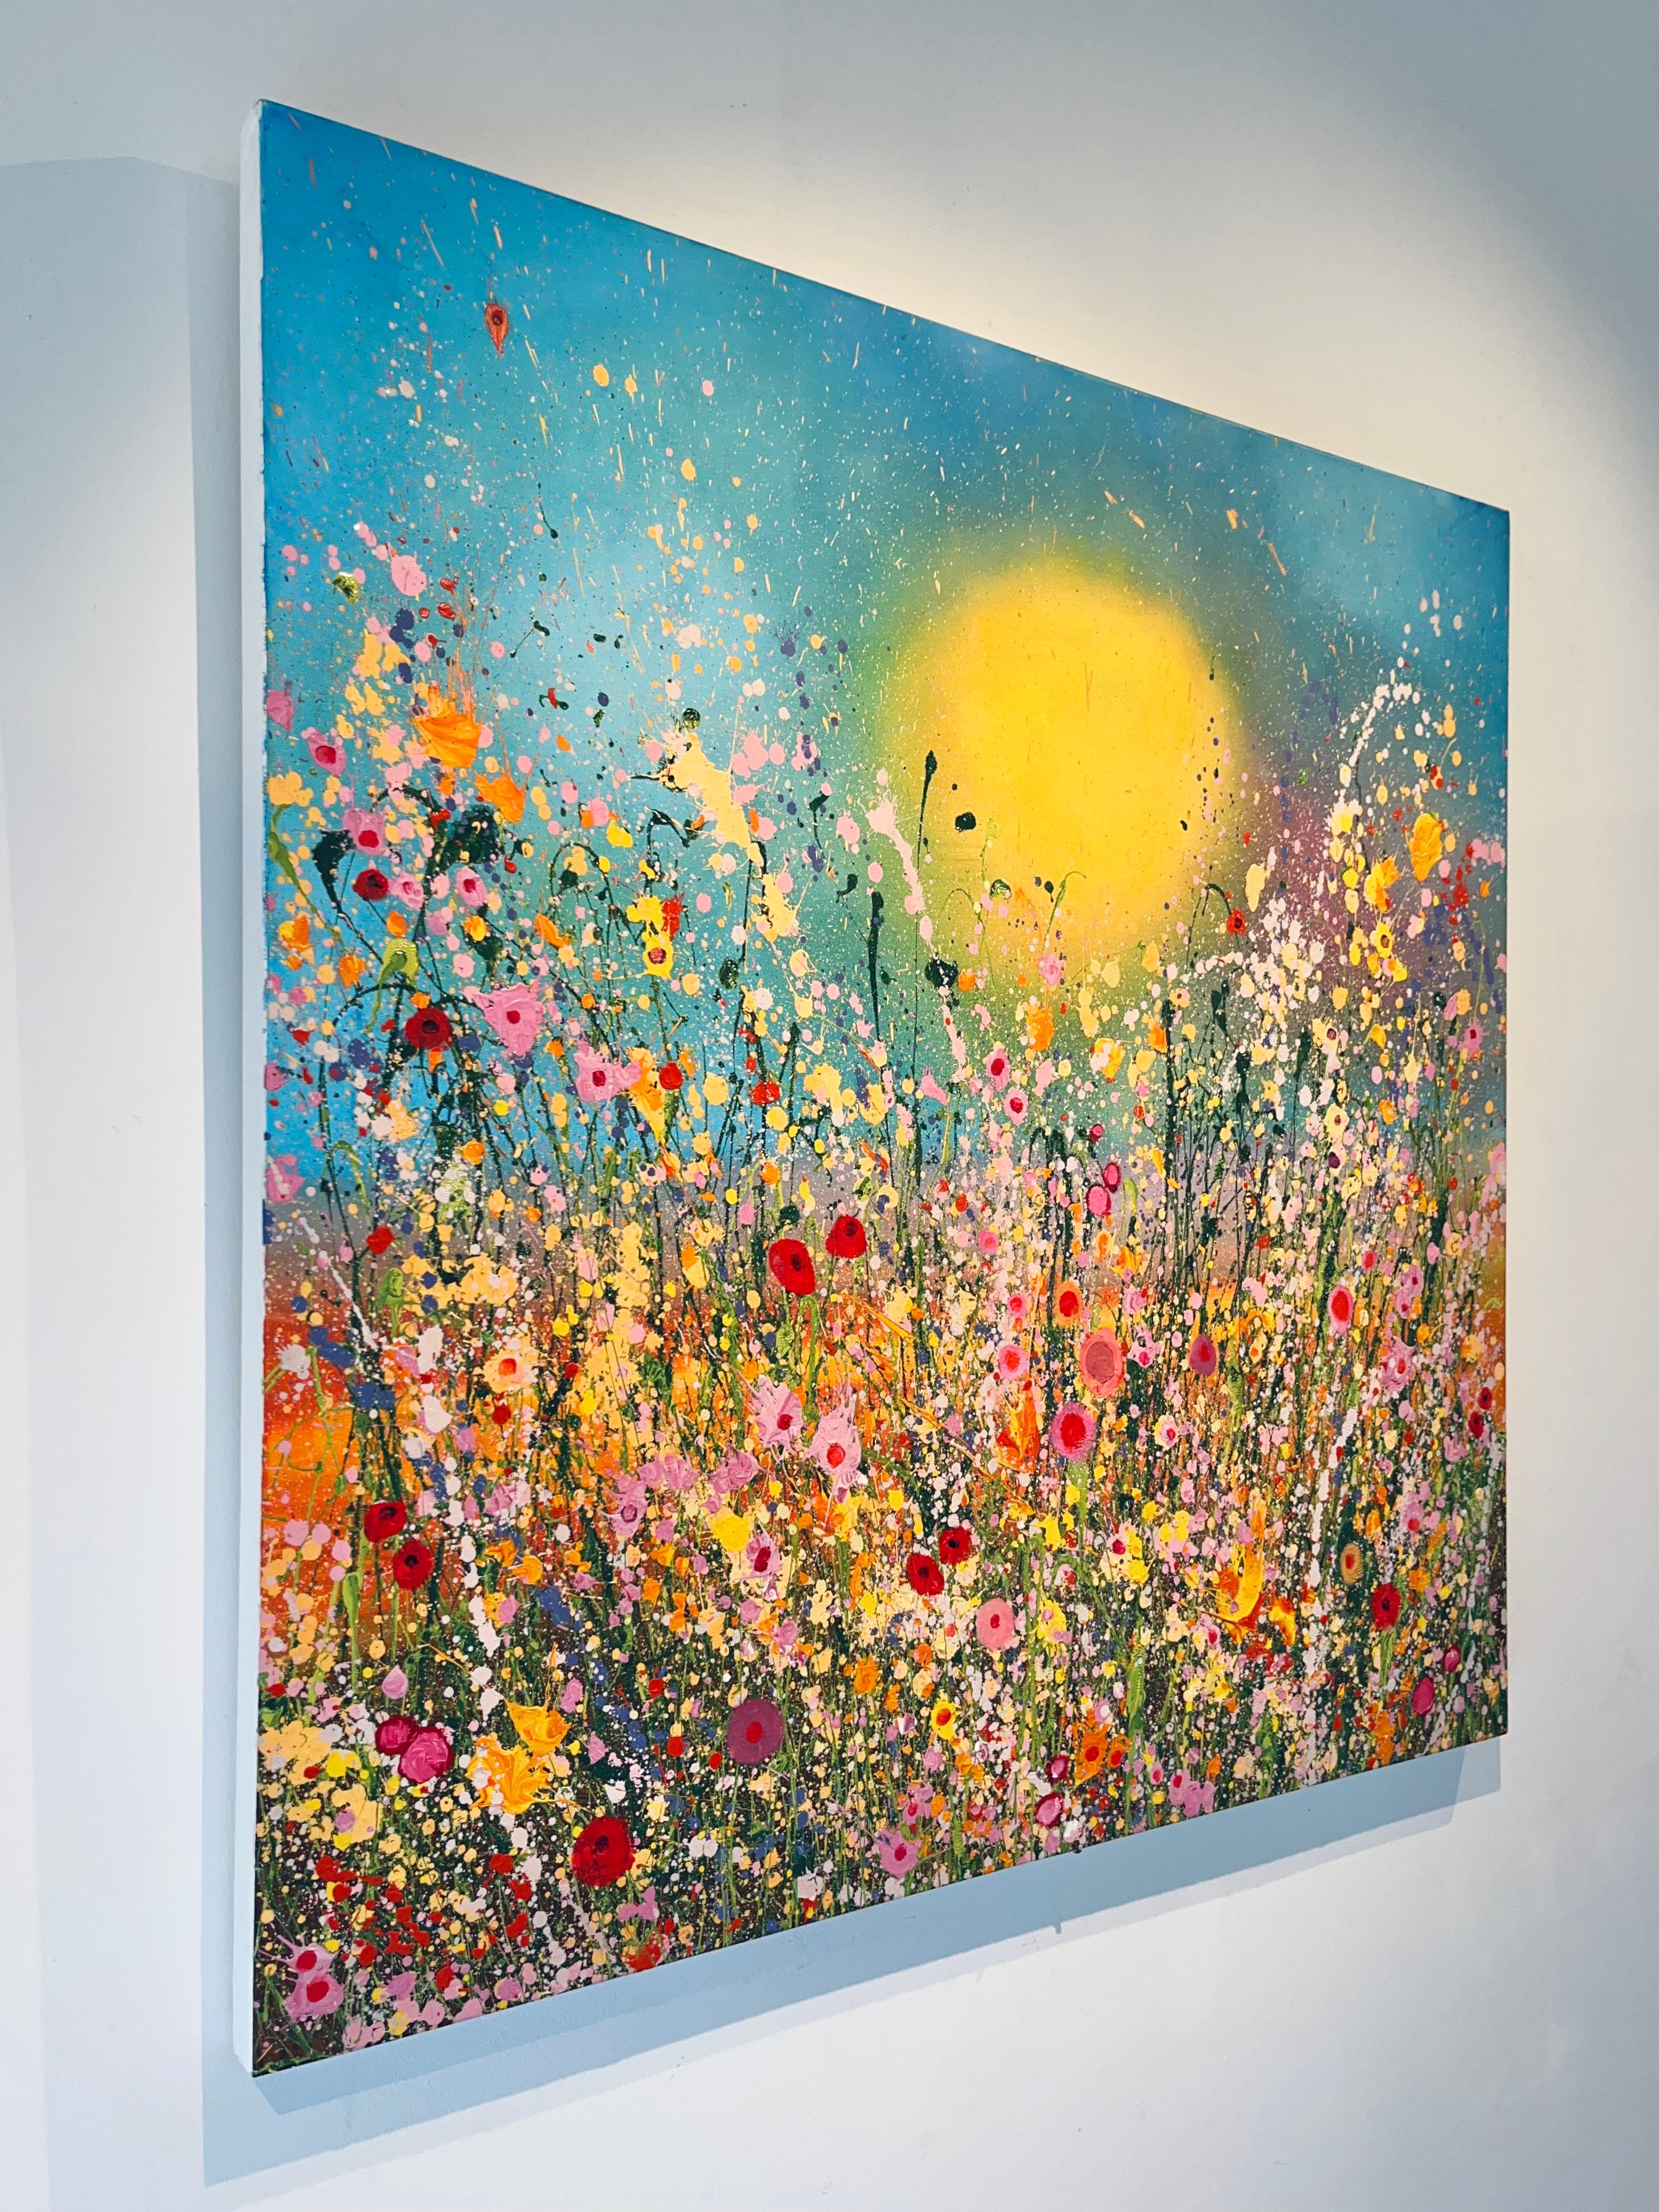  I Love You Forever- original abstract floral oil painting-contemporary artwork - Naturalistic Painting by Yvonne Coomber